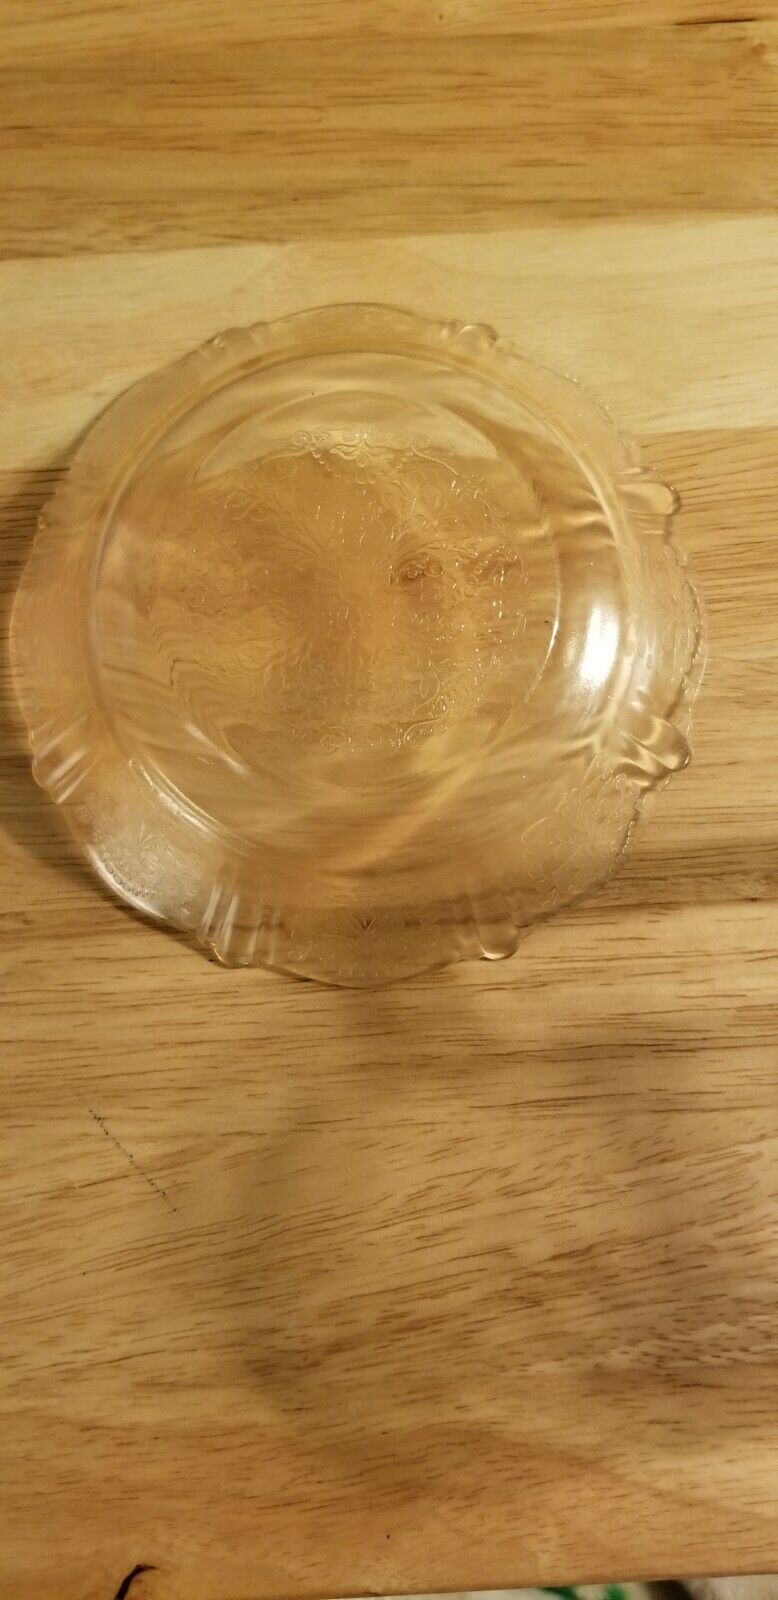 Vintage 1930's Pink American Sweetheart 6" Cereal Bowl - Depression Glass